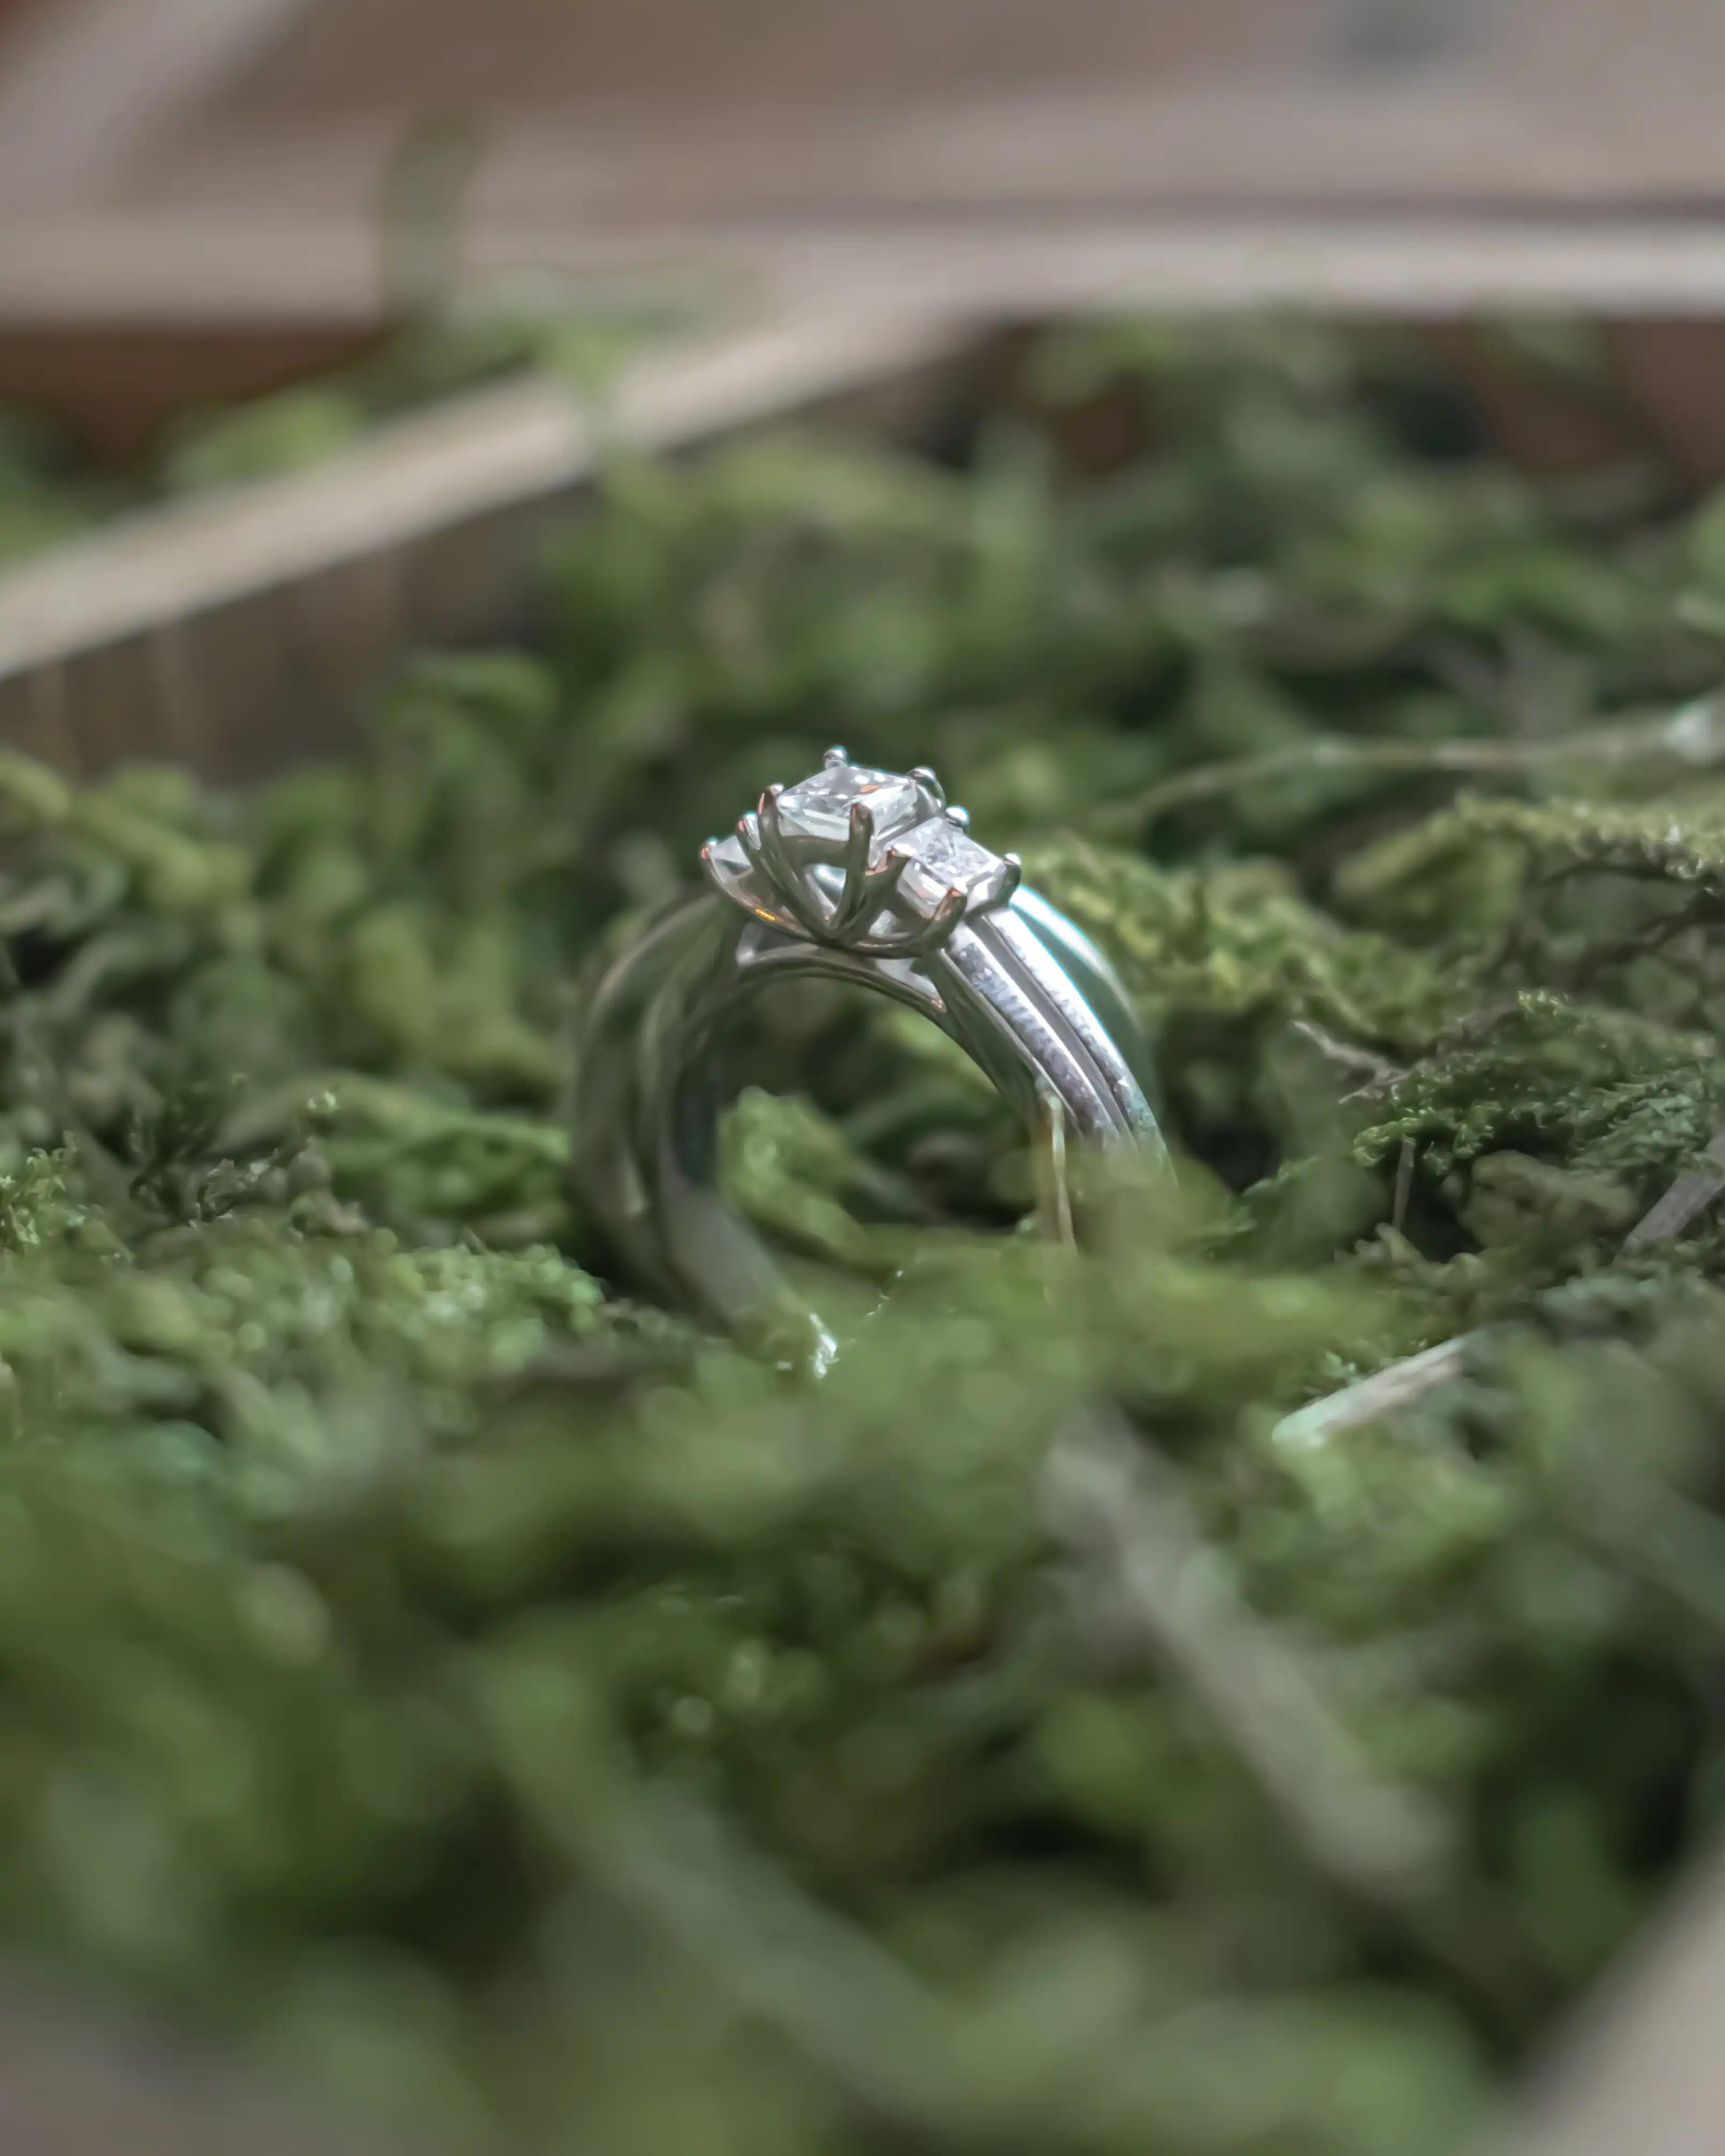 A close-up shot of the bride's ring surrounded by green foliage.